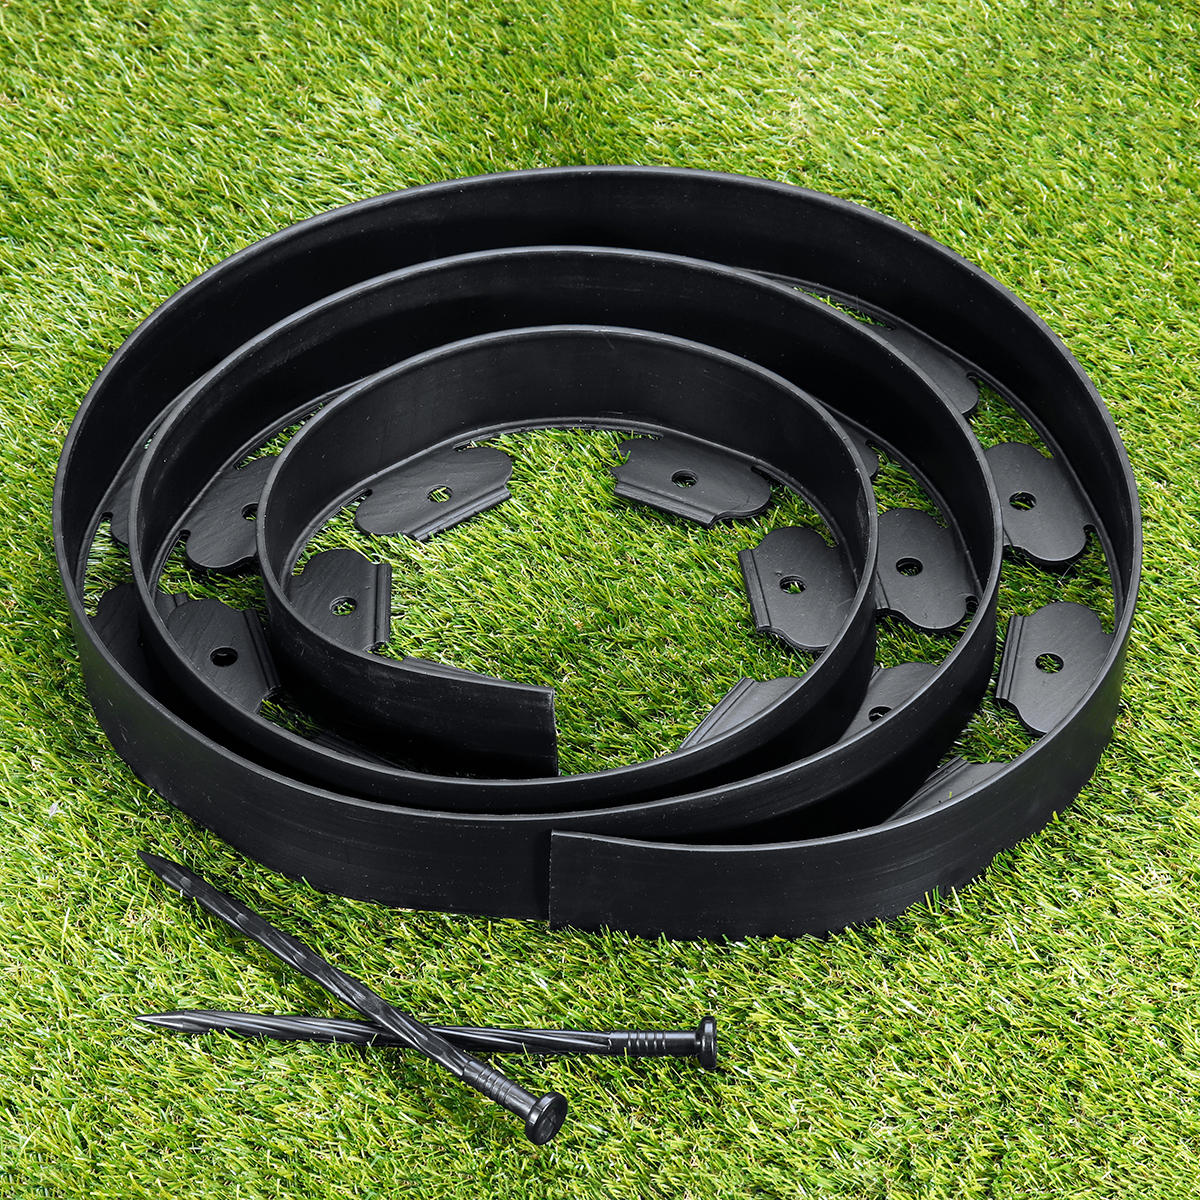 

Garden Flexible Lawn Grass Plastic Edging Border 3meters+10 Extra Strong Pins Decorations